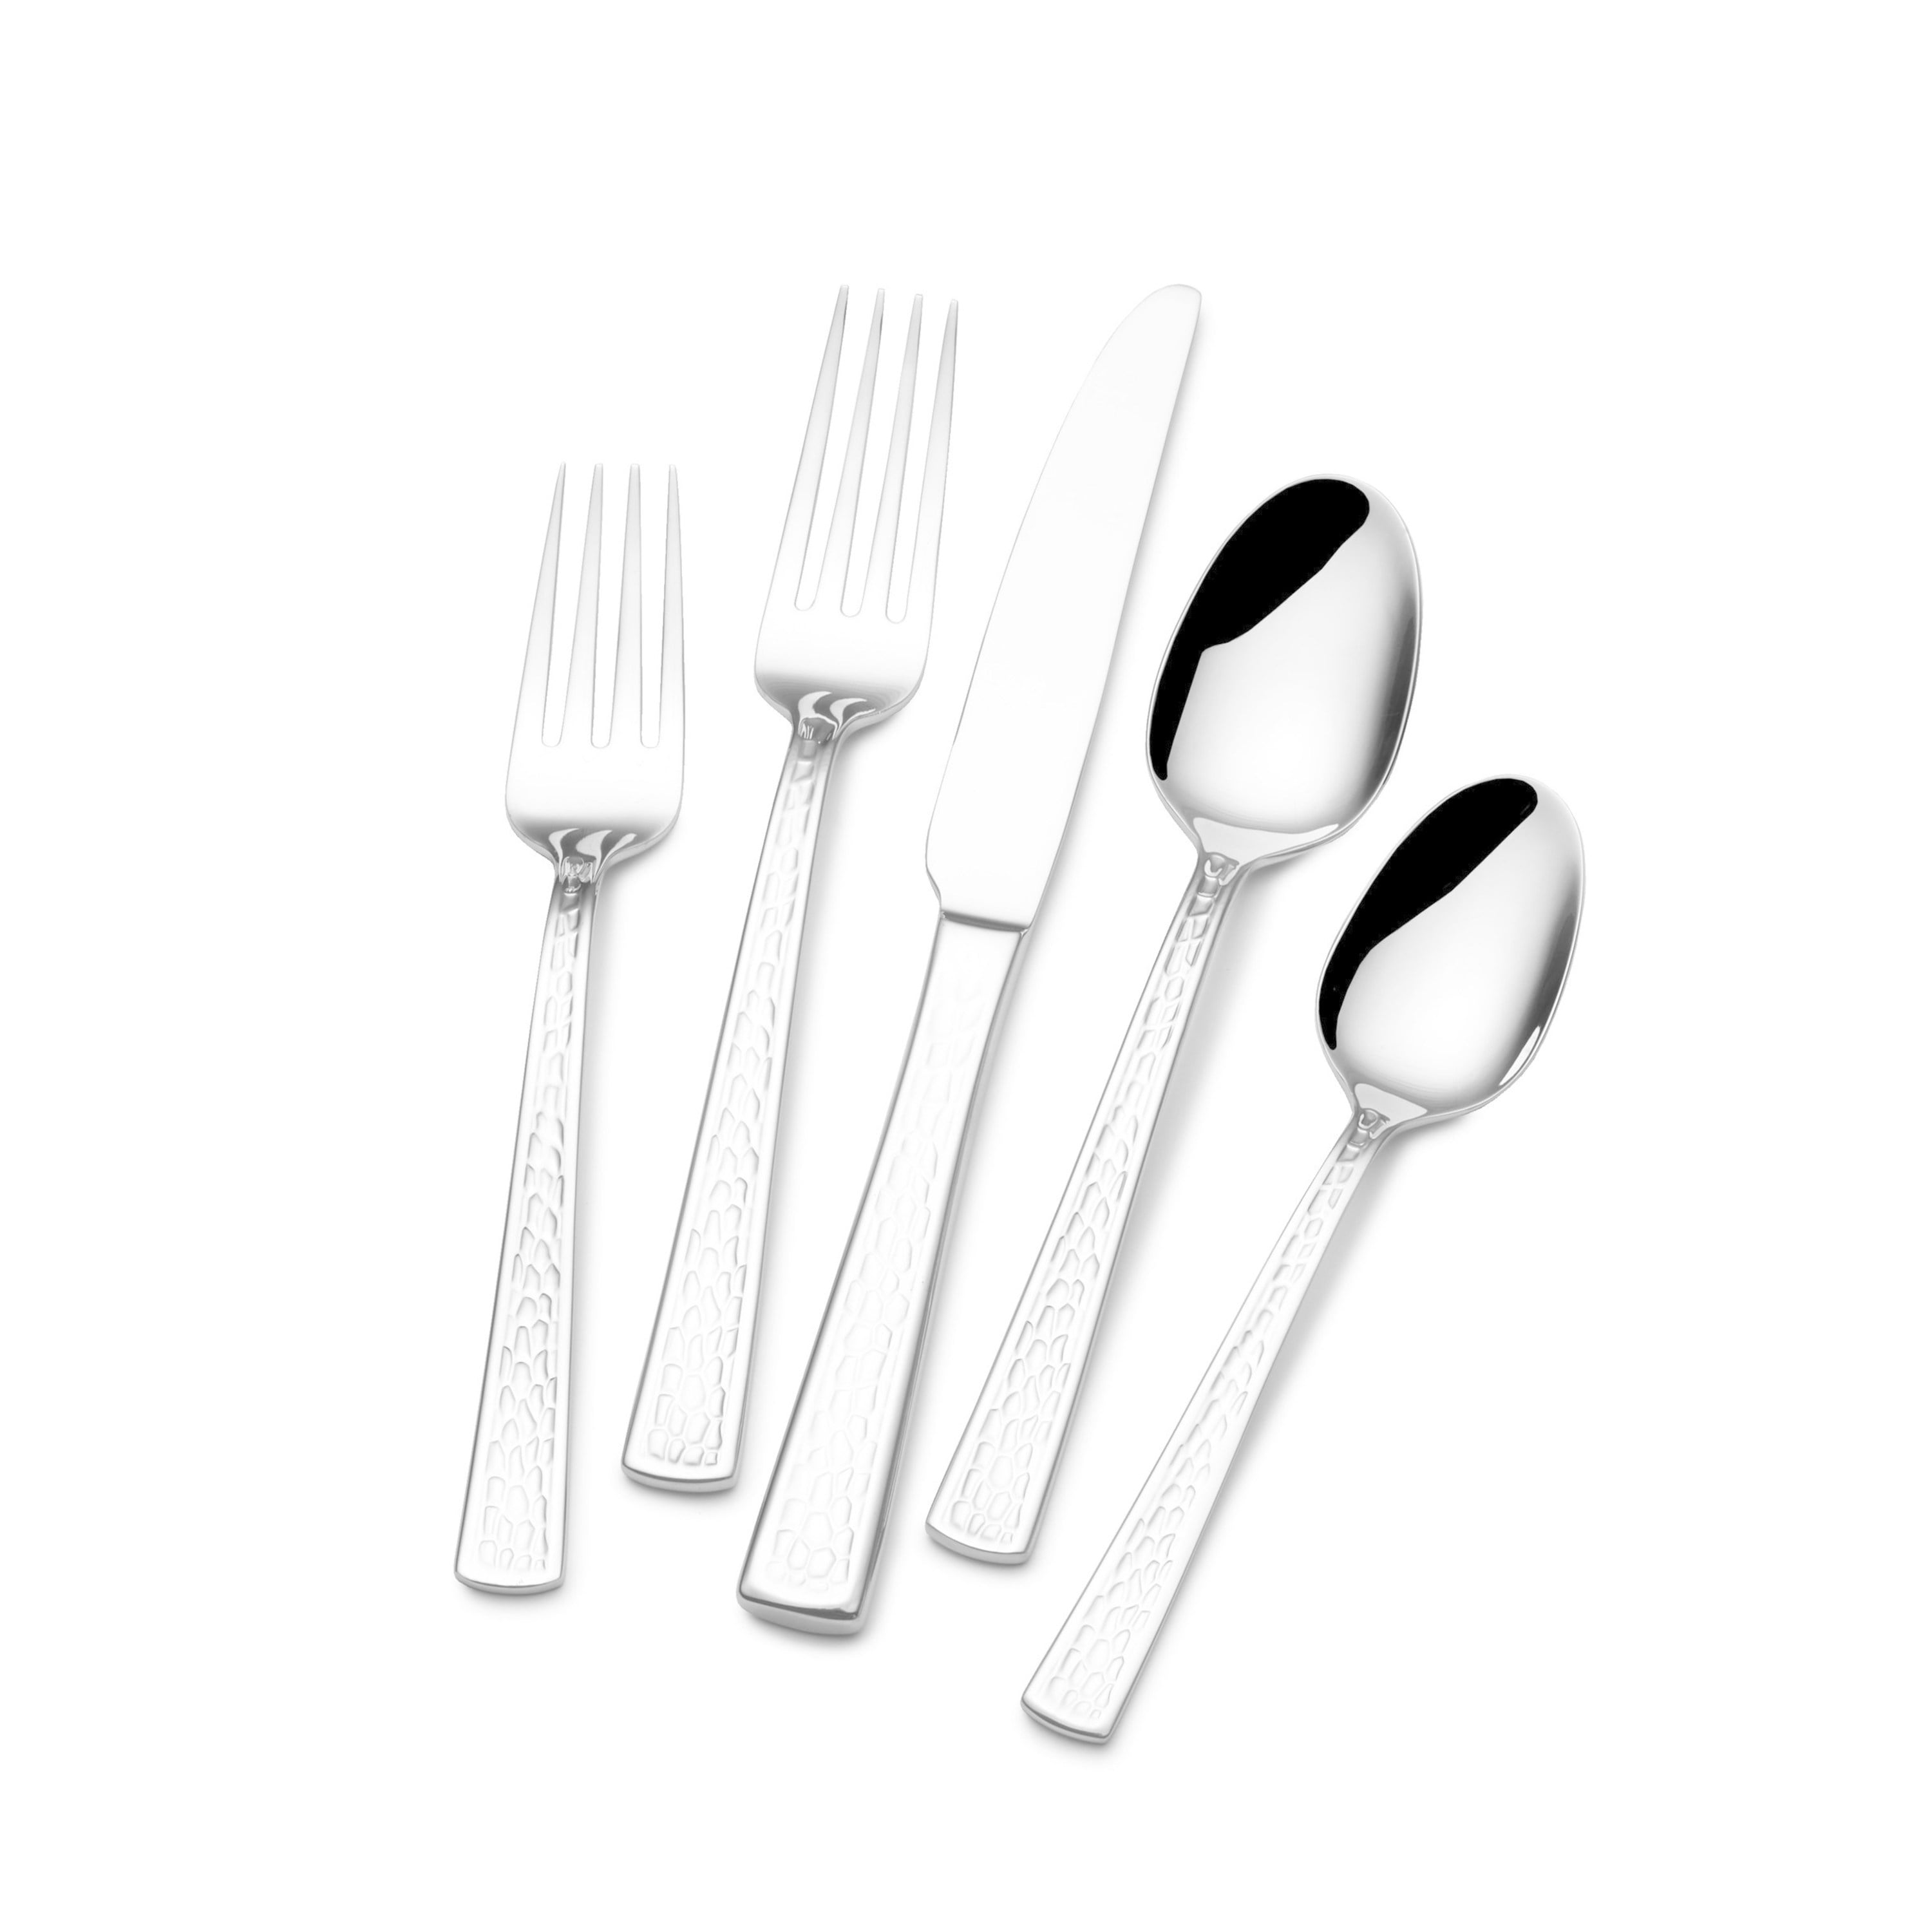 Towle Hammersmith 45-Piece 18/10 Stainless Steel Flatware Set with Hostess Serveware Service for 8 